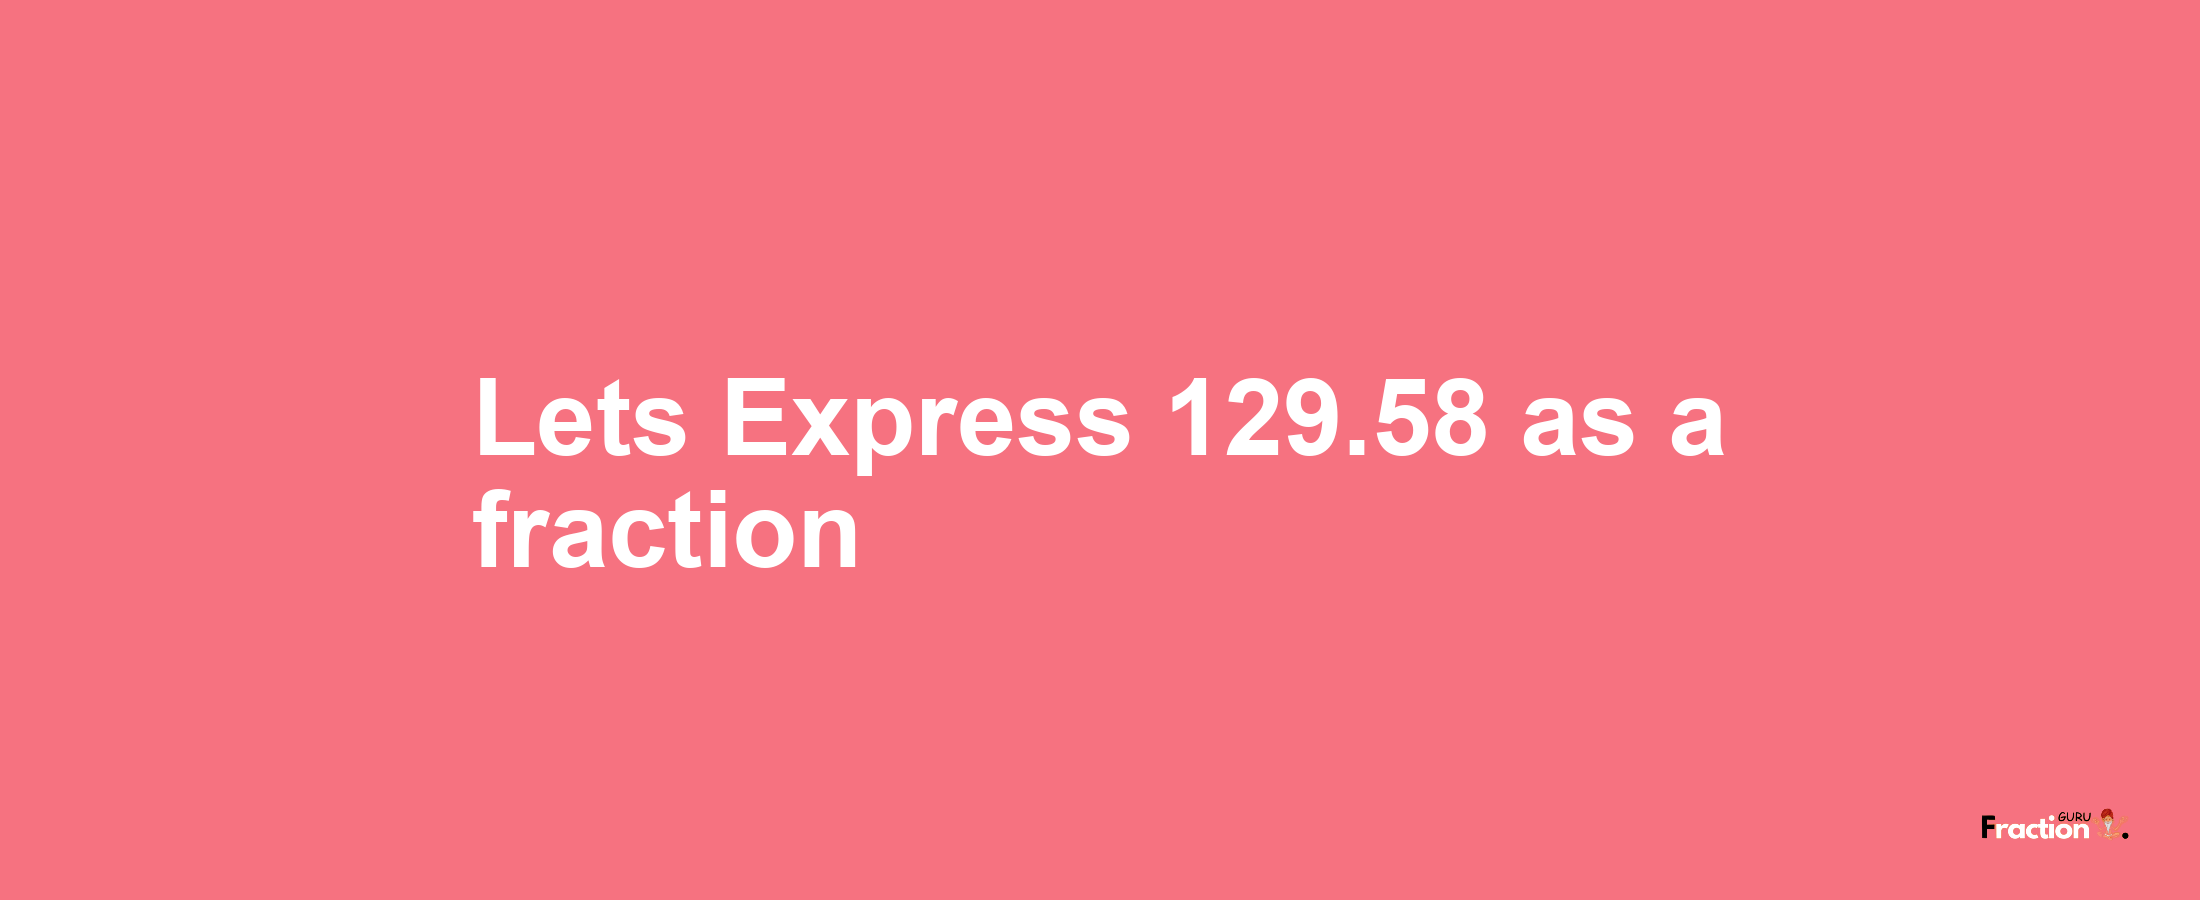 Lets Express 129.58 as afraction